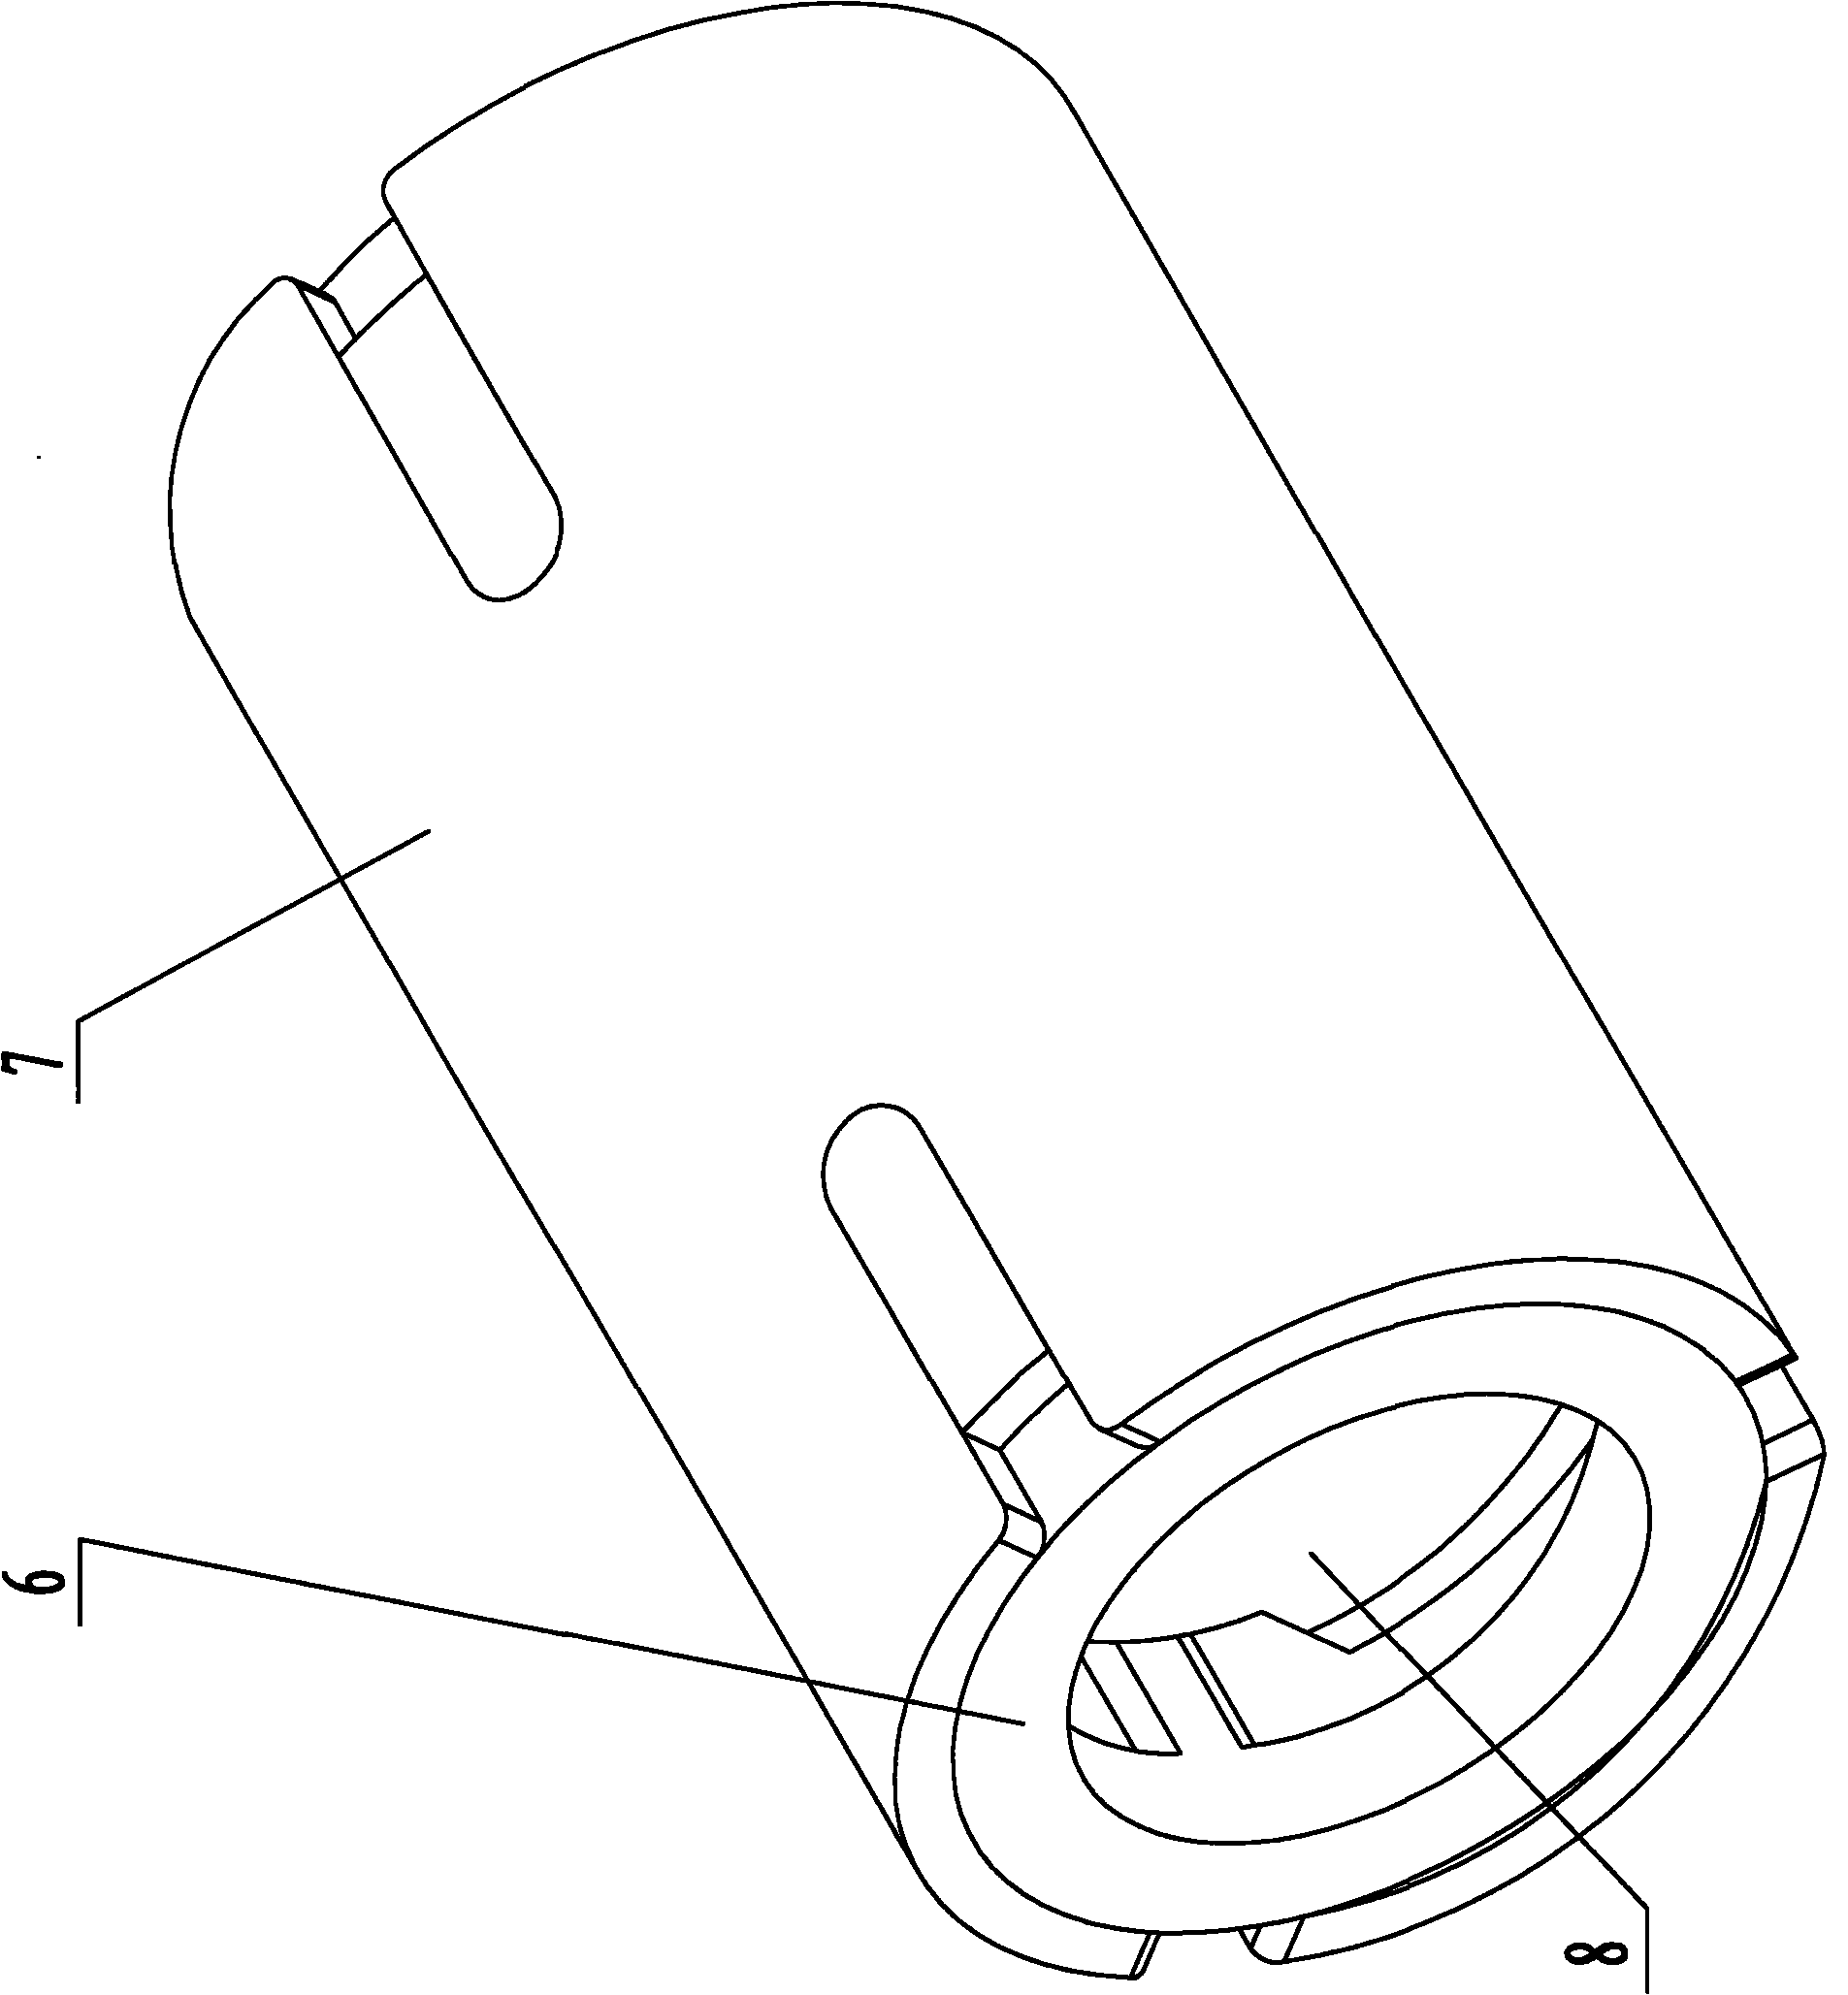 Electromagnetic actuator of capsule robot